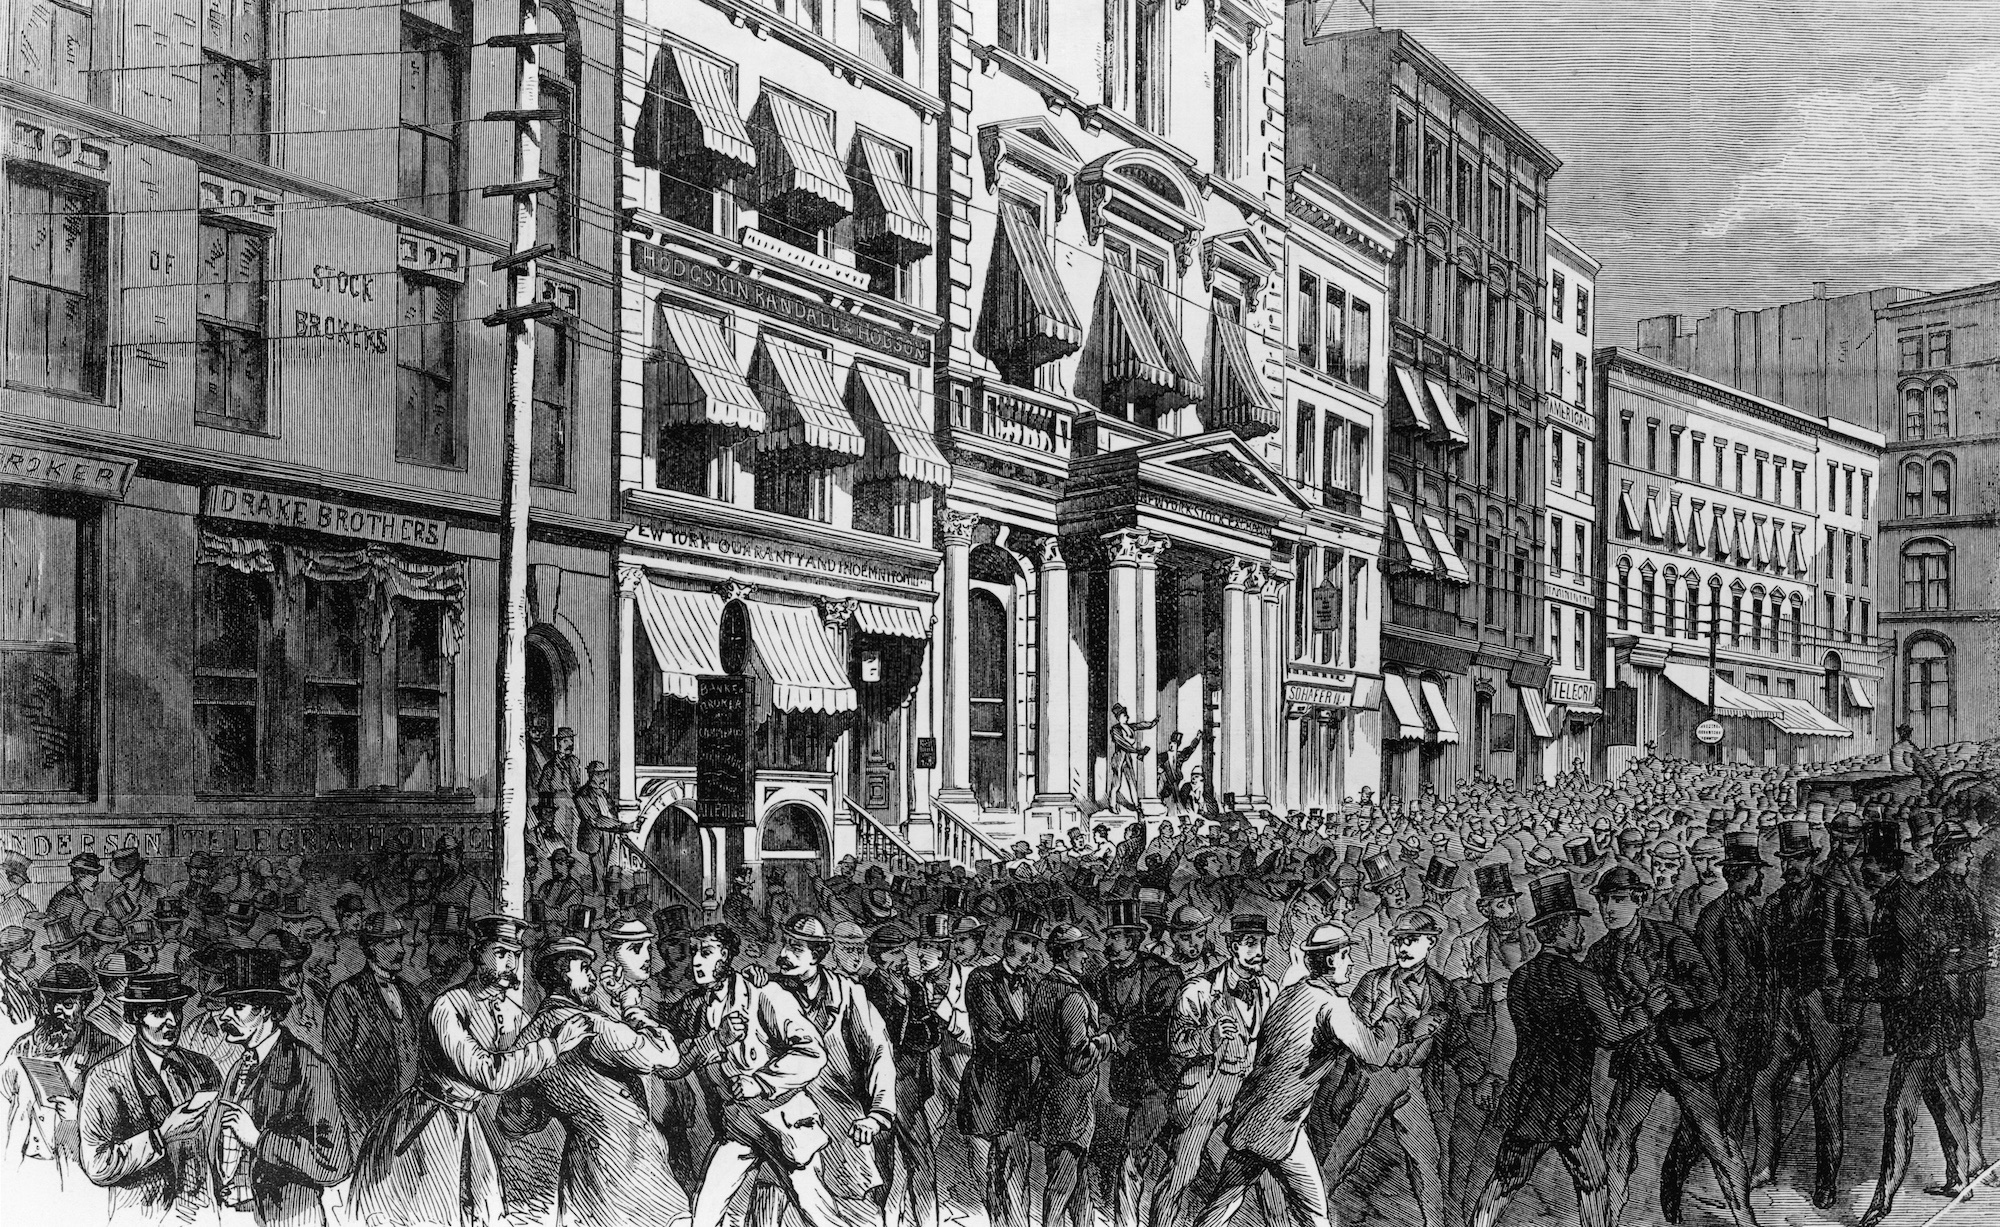 A panicked crowd on Broad Street, New York City, after the closing of the stock exchange doors during the Panic of 1873, 20th September 1873. The stock exchange stayed closed for ten days. (Photo by Kean Collection/Archive Photos/Getty Images)